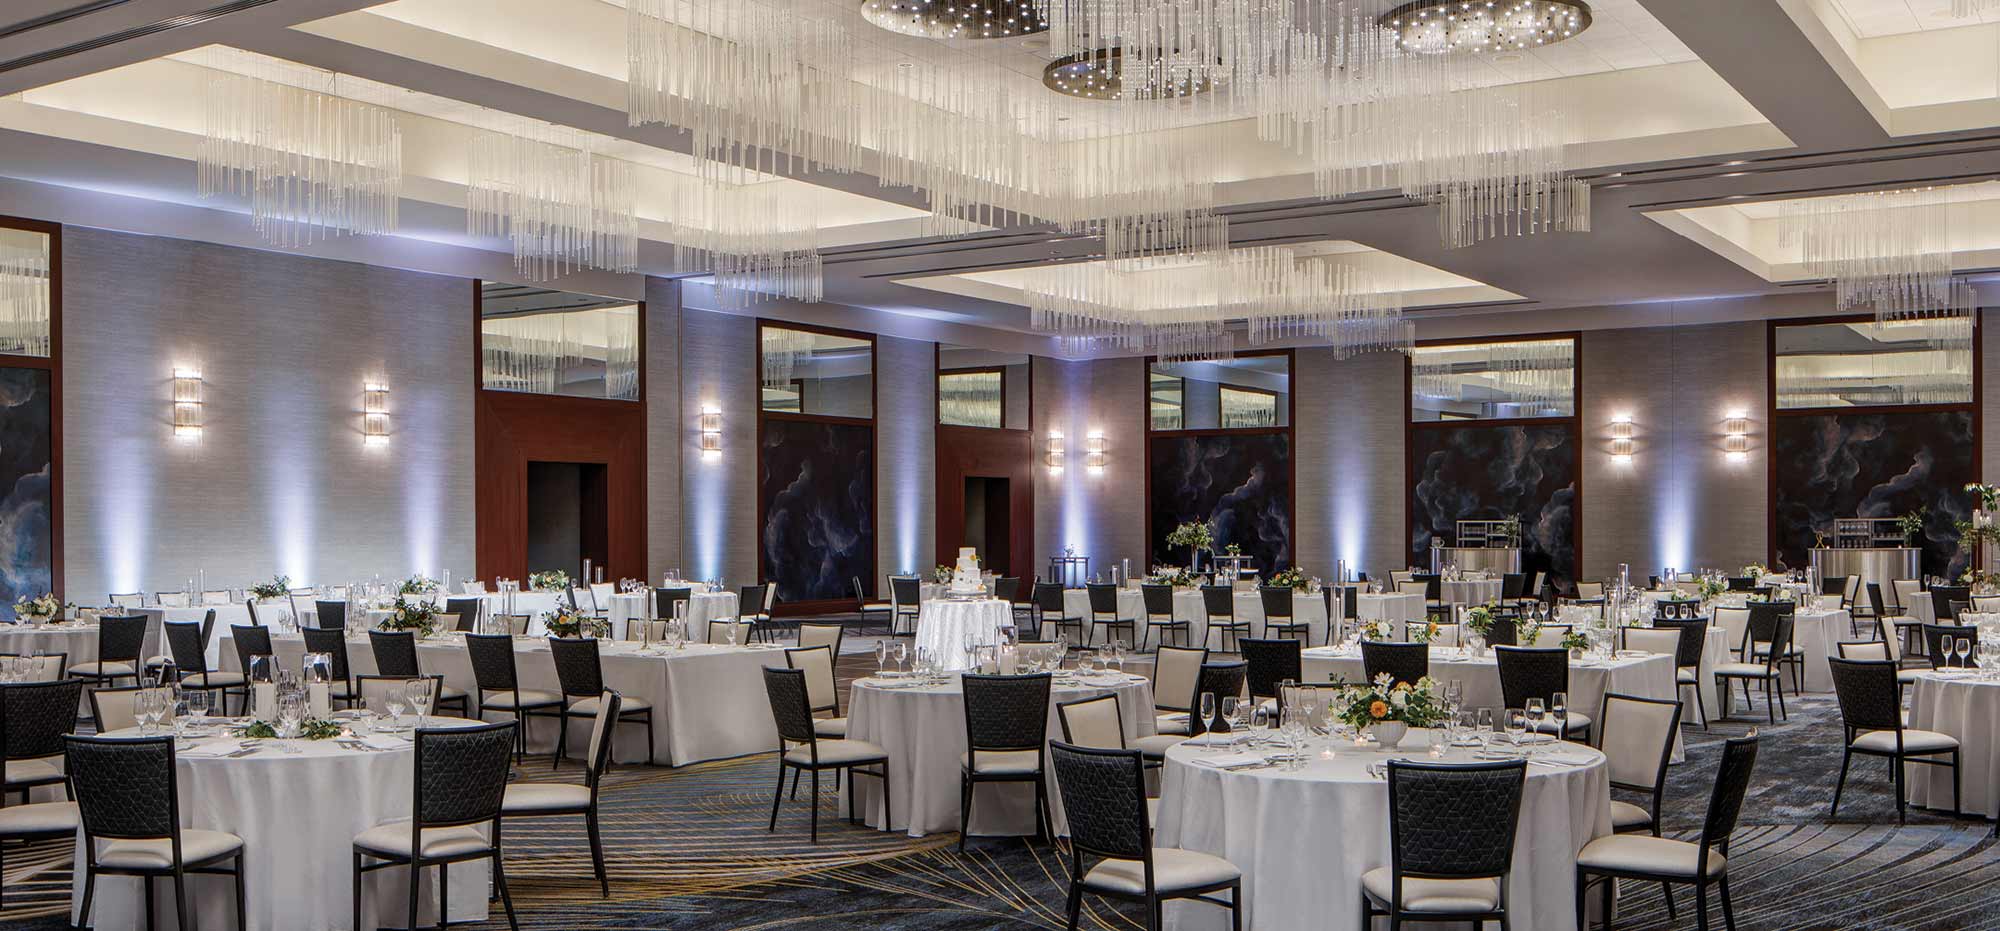 Large ballroom area with many white tables and black colored chairs all around with glass cups, forks, spoons, napkins, small flower bouquet decorations, and hanging floating crystal thin skinny chandeliers inside at the JW Marriott Grand Rapids venue